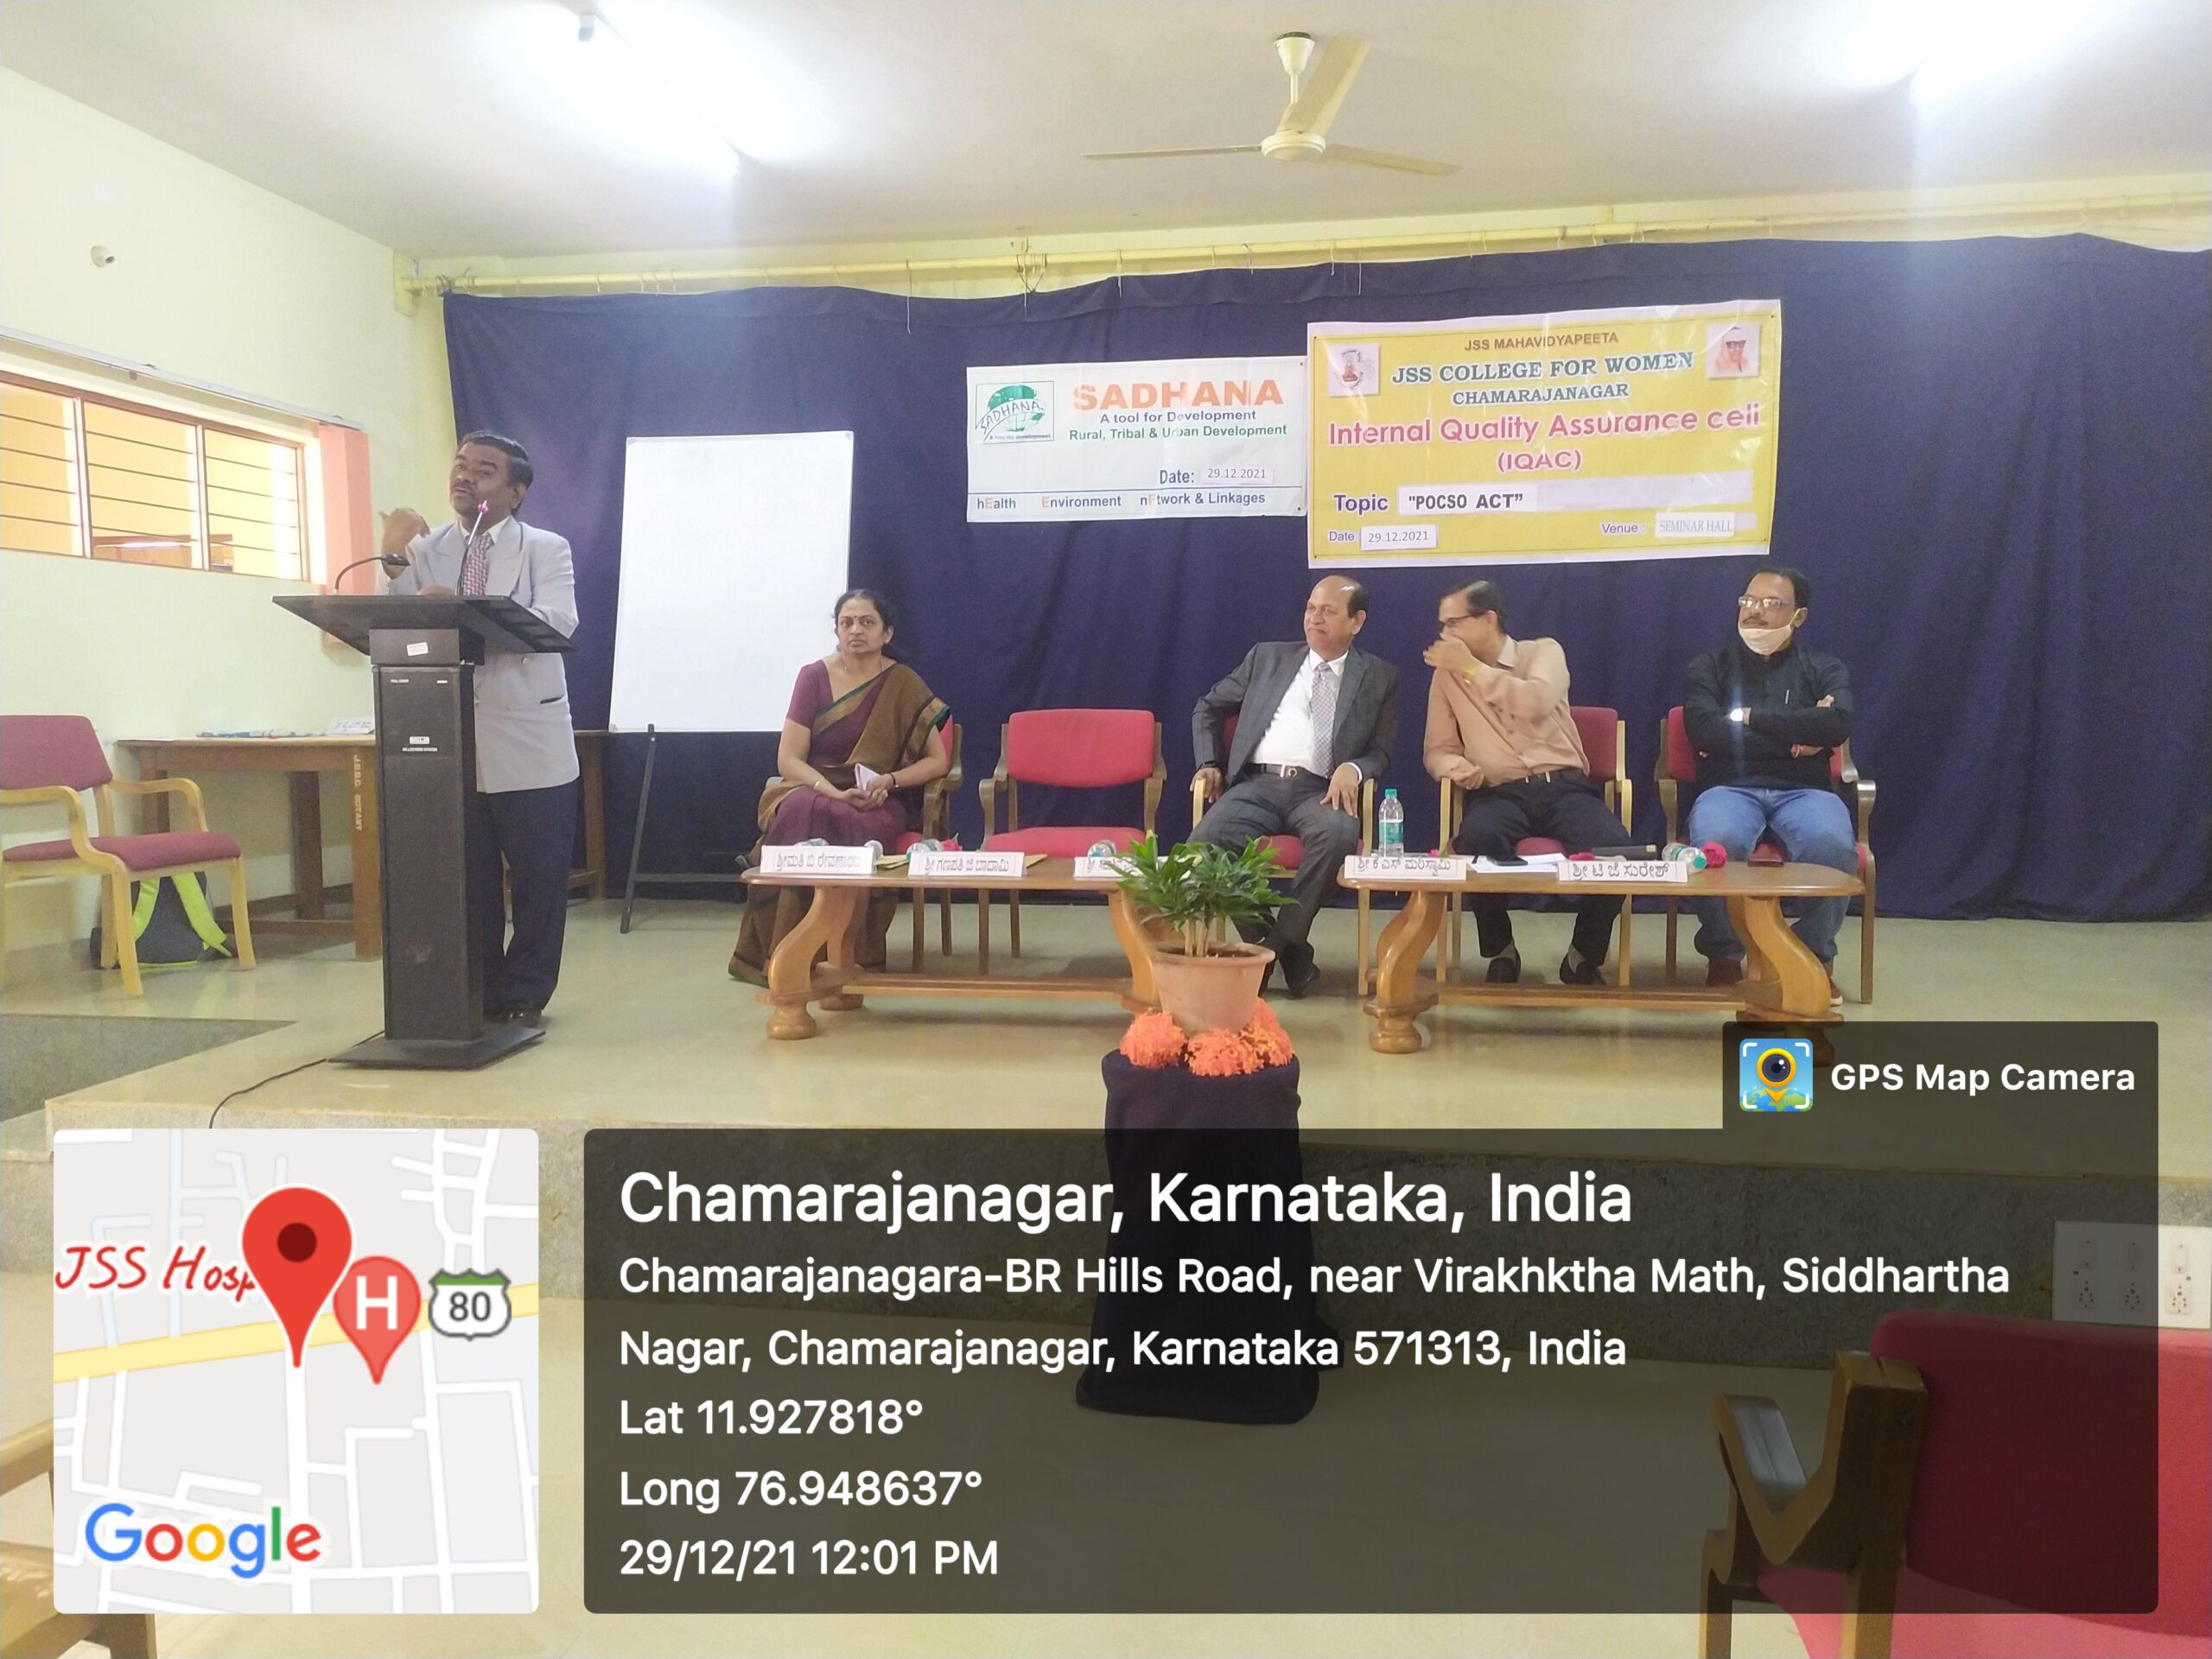 Special Lecture Programme on “POCSO ACT ” organized by IQAC in association with Sadhana NGO Cgamarajanagar. Resource Person Sri Sahashiva S. Sulthanpuri Honourable Chief President and District Judge, District Legal Services Authority, Chamarajanagar District.